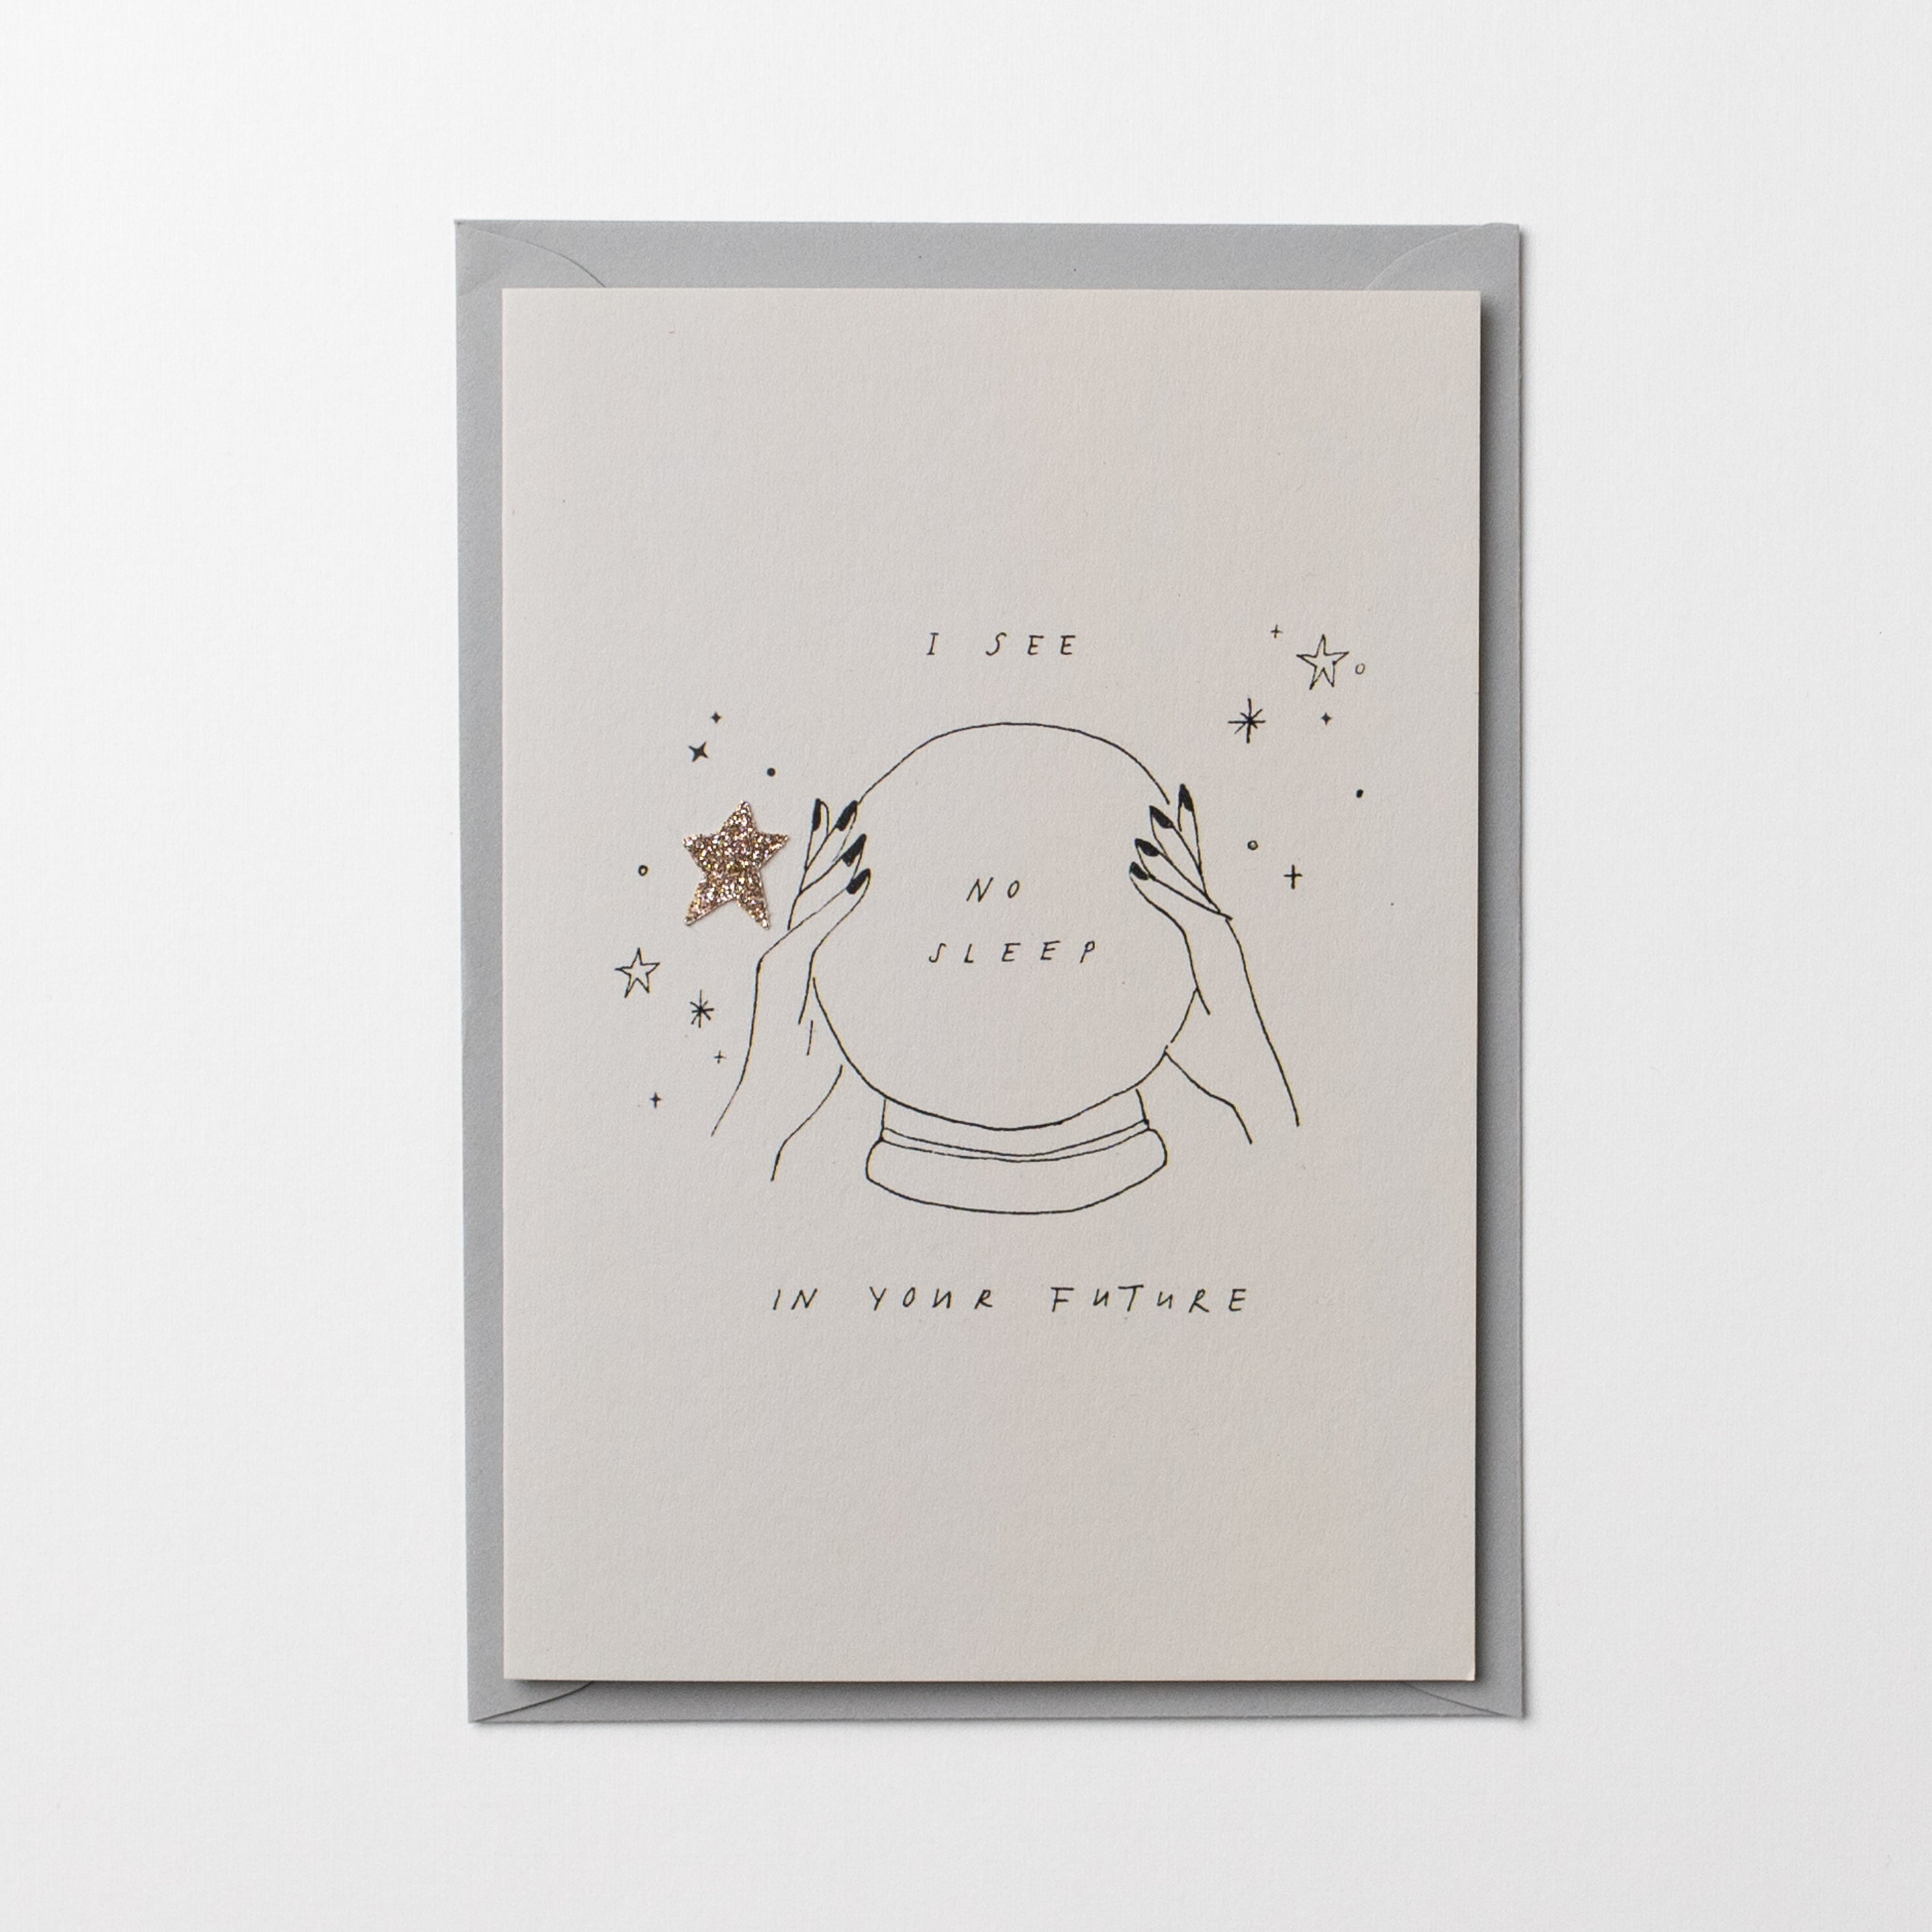 'I See No Sleep In Your Future' Greetings Card